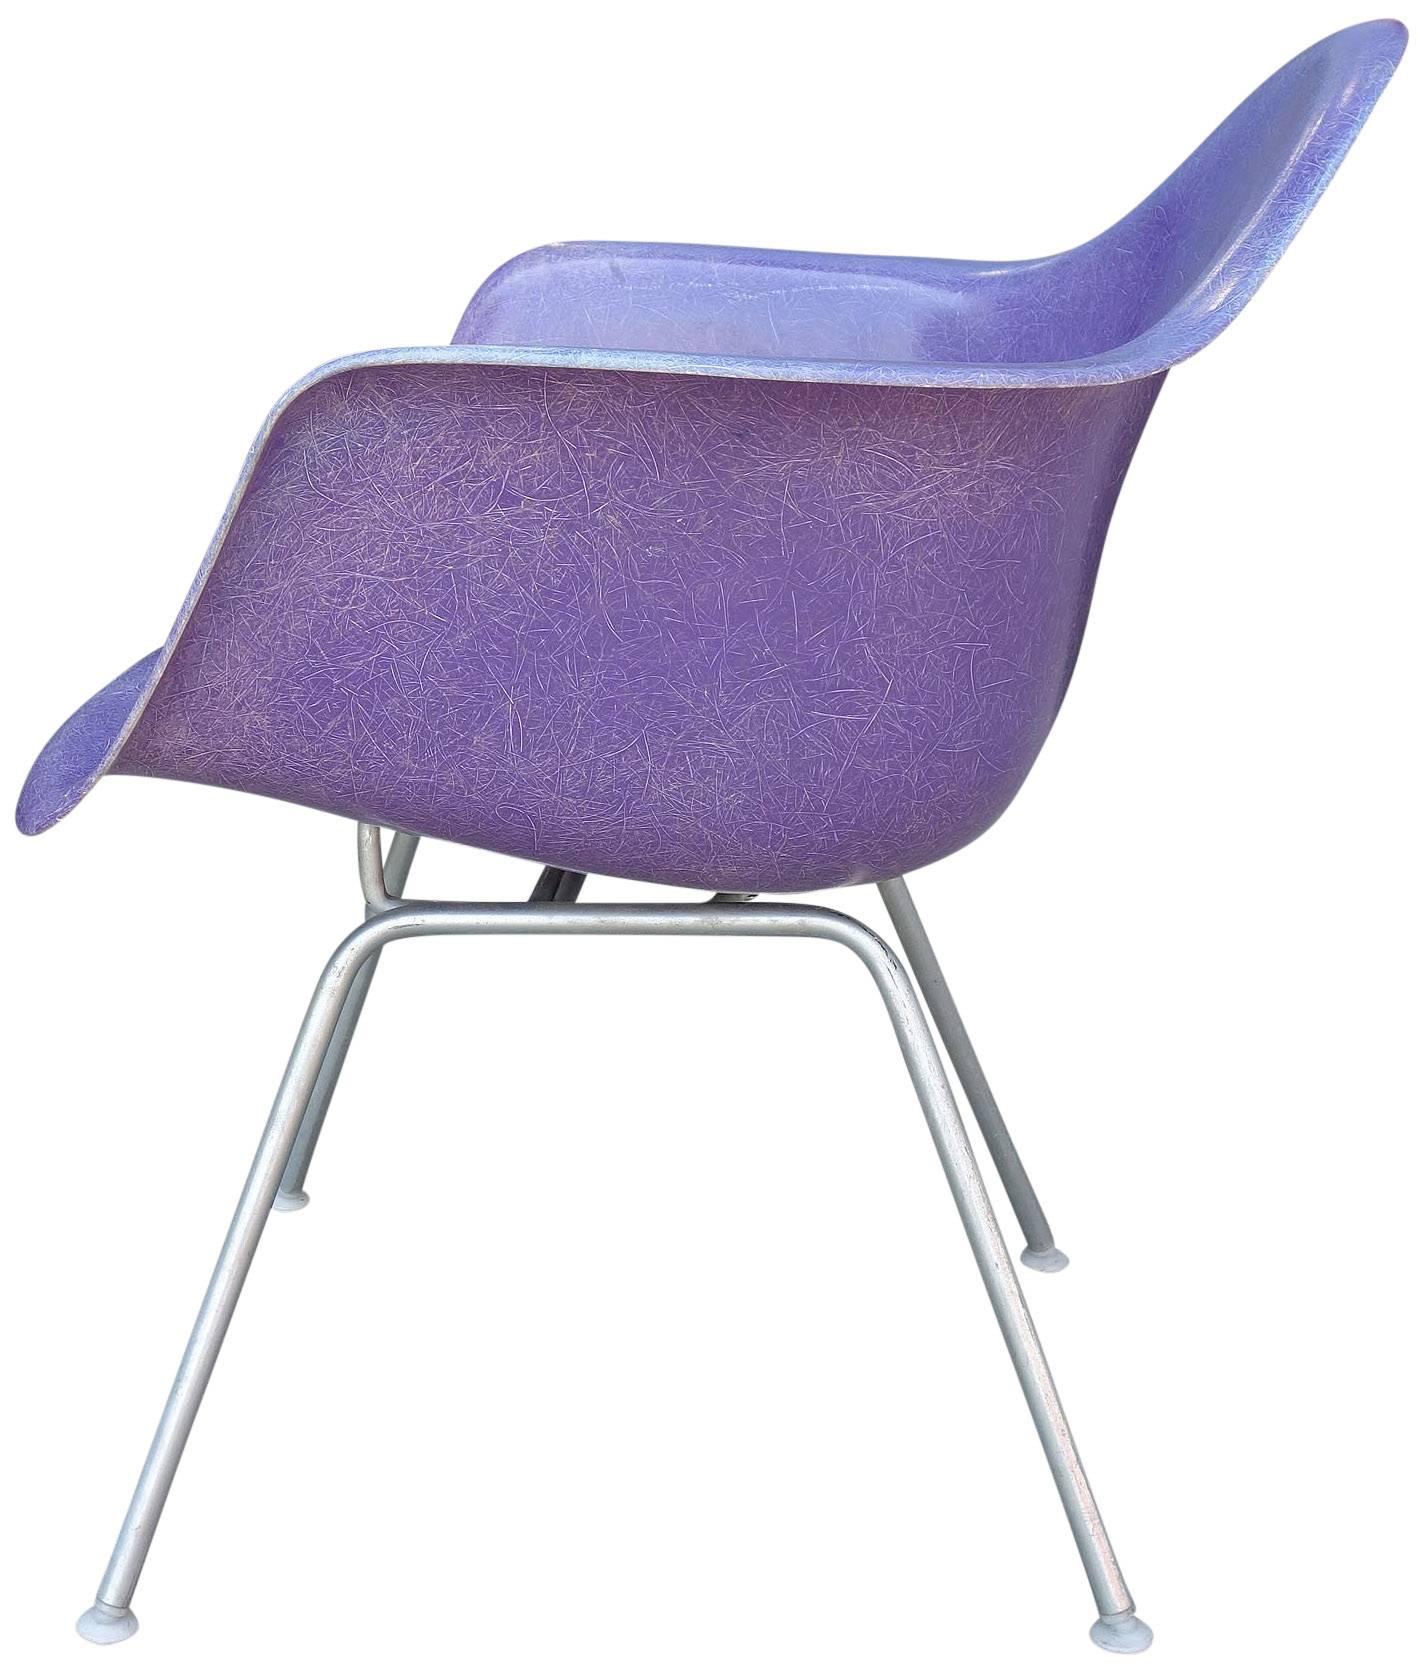 Mid-Century Eames LAX lounge armchair in rarest purple color

The rarest color known. In fact only 10 chairs in this color have been documented and most are in private collections. For many years it was a rumor that they existed. Many collectors